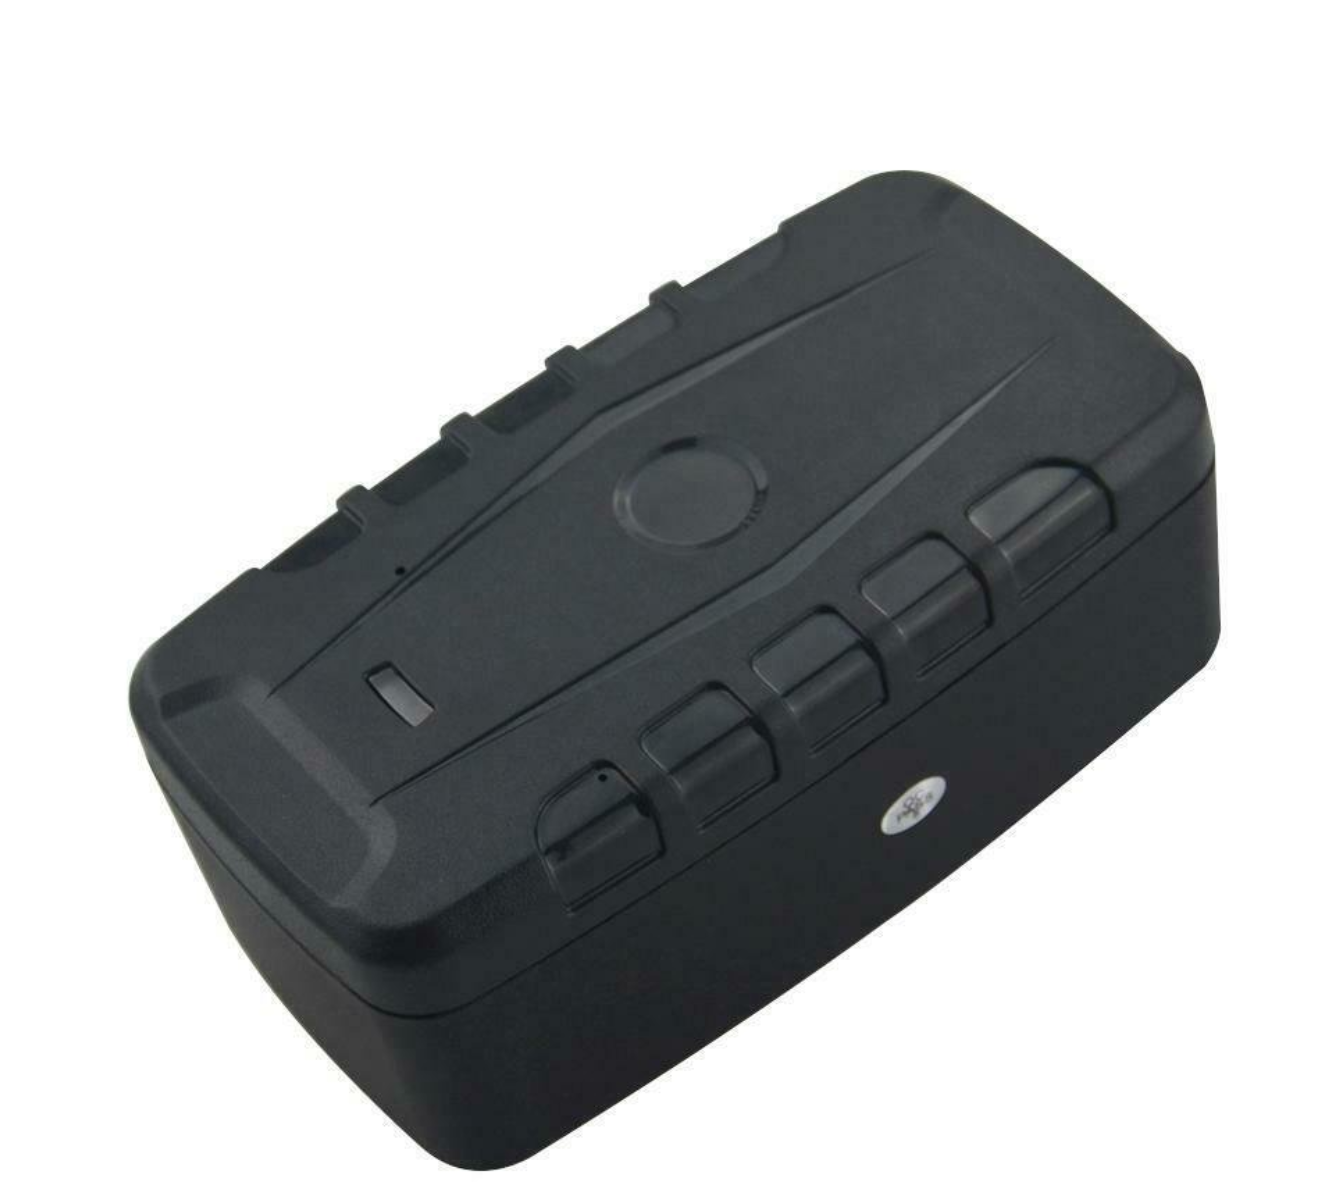 BIG BROTHER REAL-TIME A-GPS TRACKER